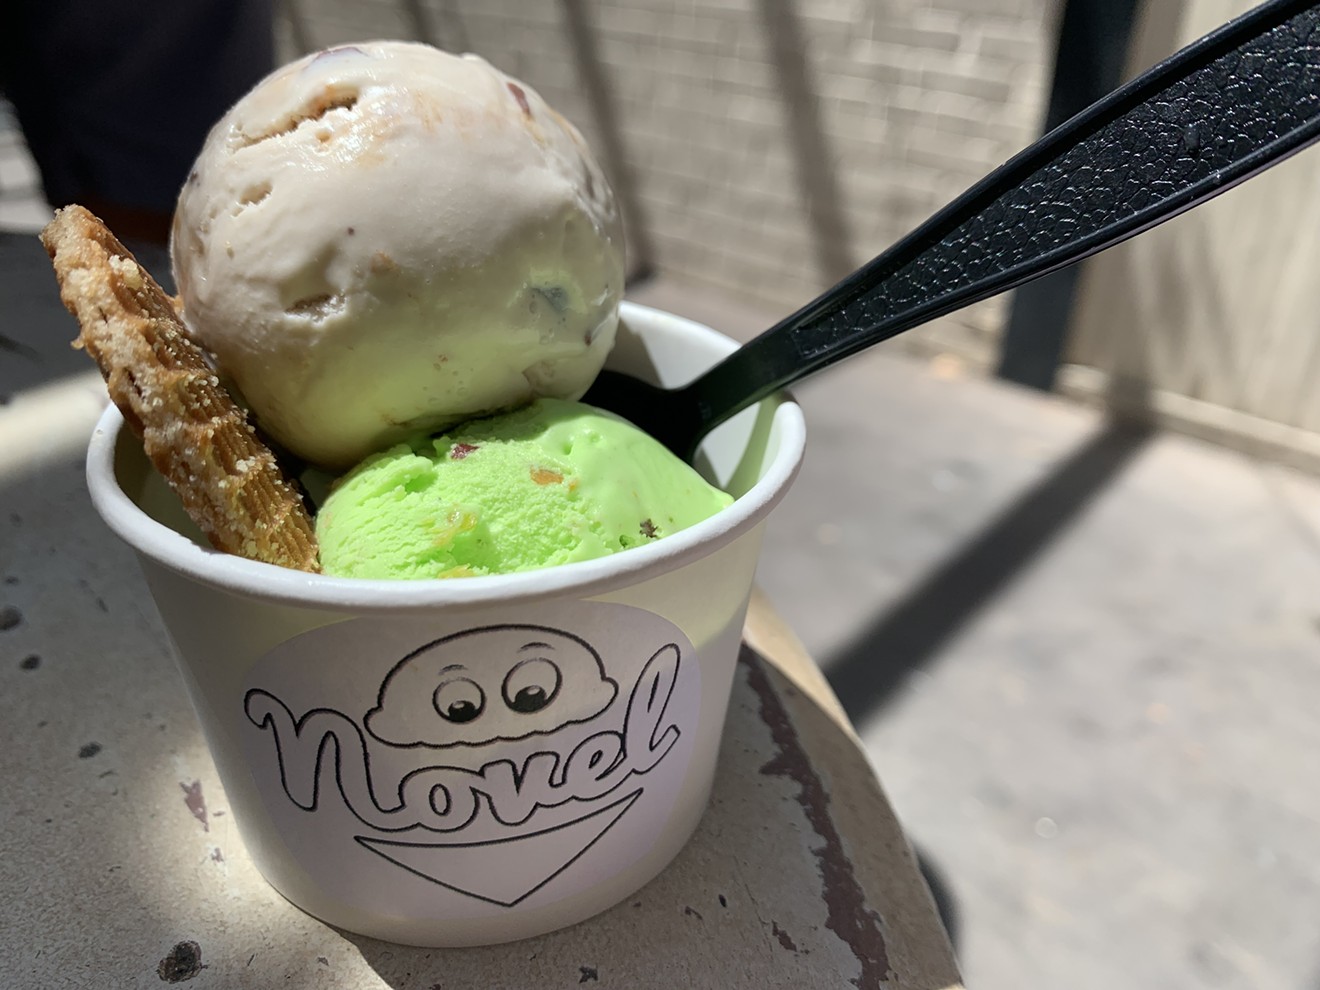 Novel Ice Cream serves unique flavors at two tiny shops in the Valley.